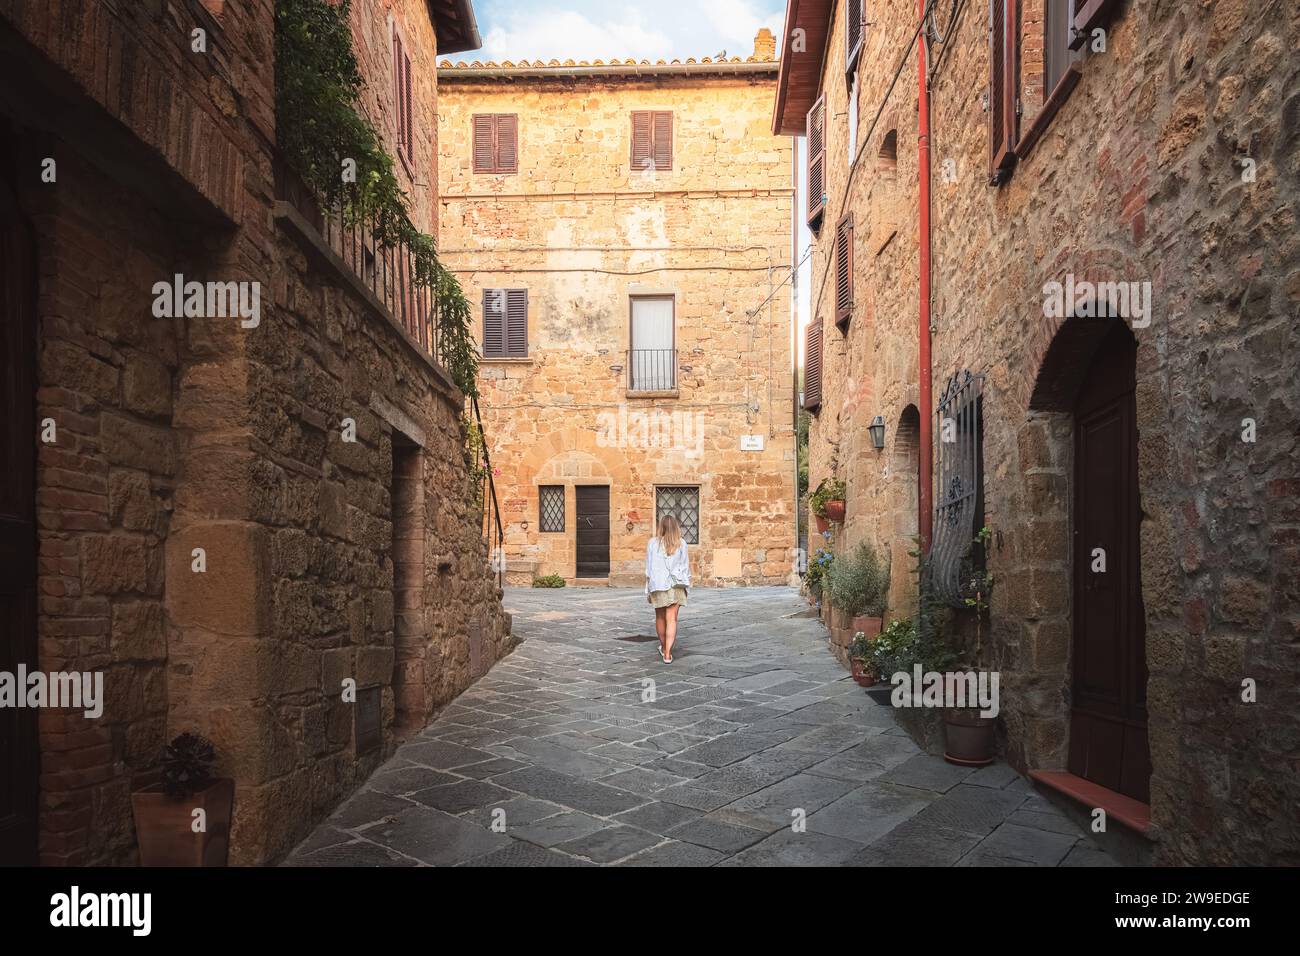 A young blonde female tourist explores backstreets of the quaint and charming Tuscan village Monticchiello, Tuscany, Italy. Stock Photo